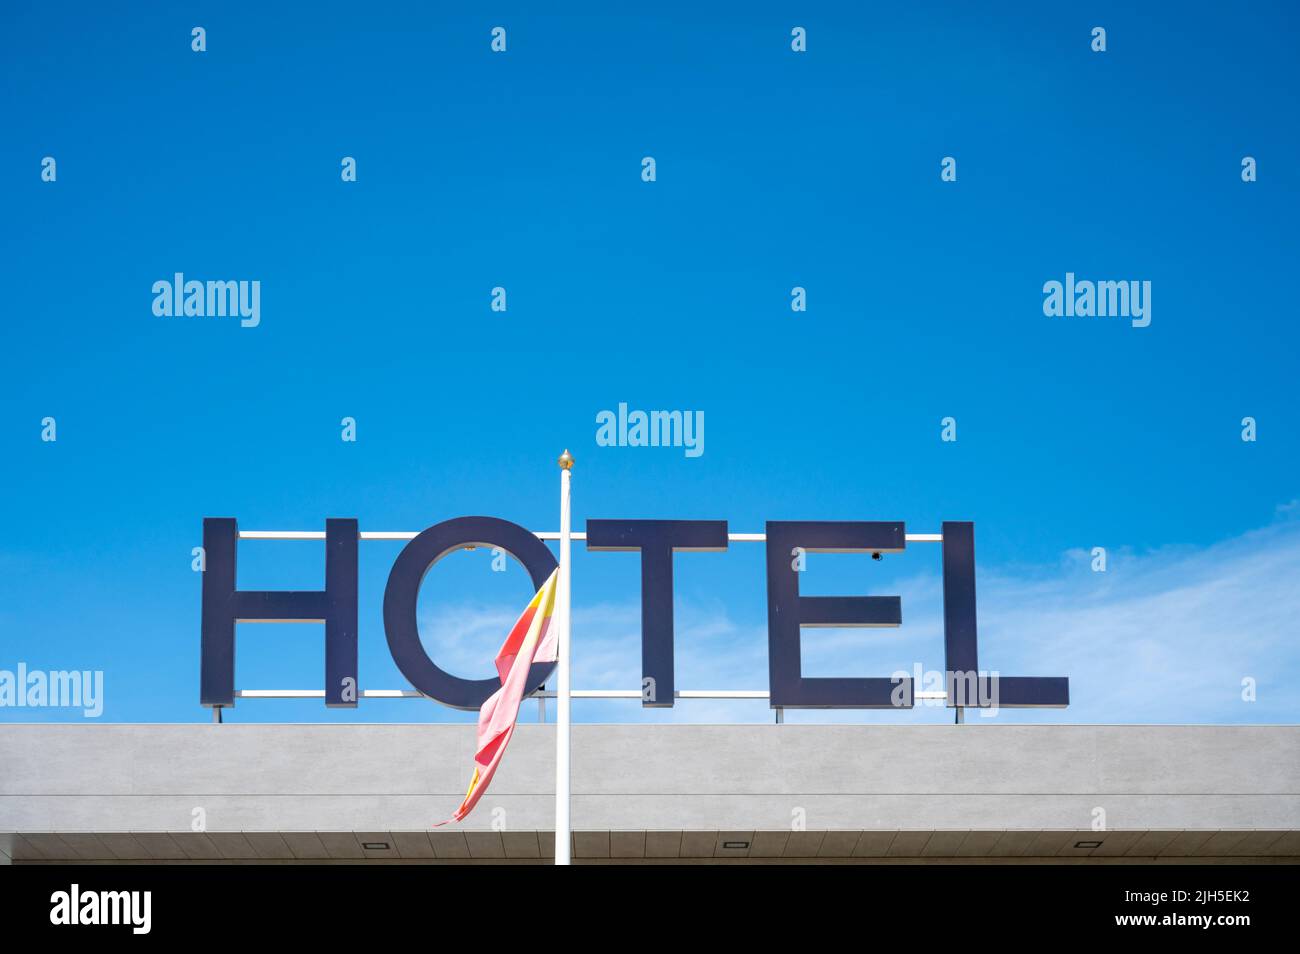 A Repsol hotel advertising sign at a service area in Spain against a colourful blue sky Stock Photo